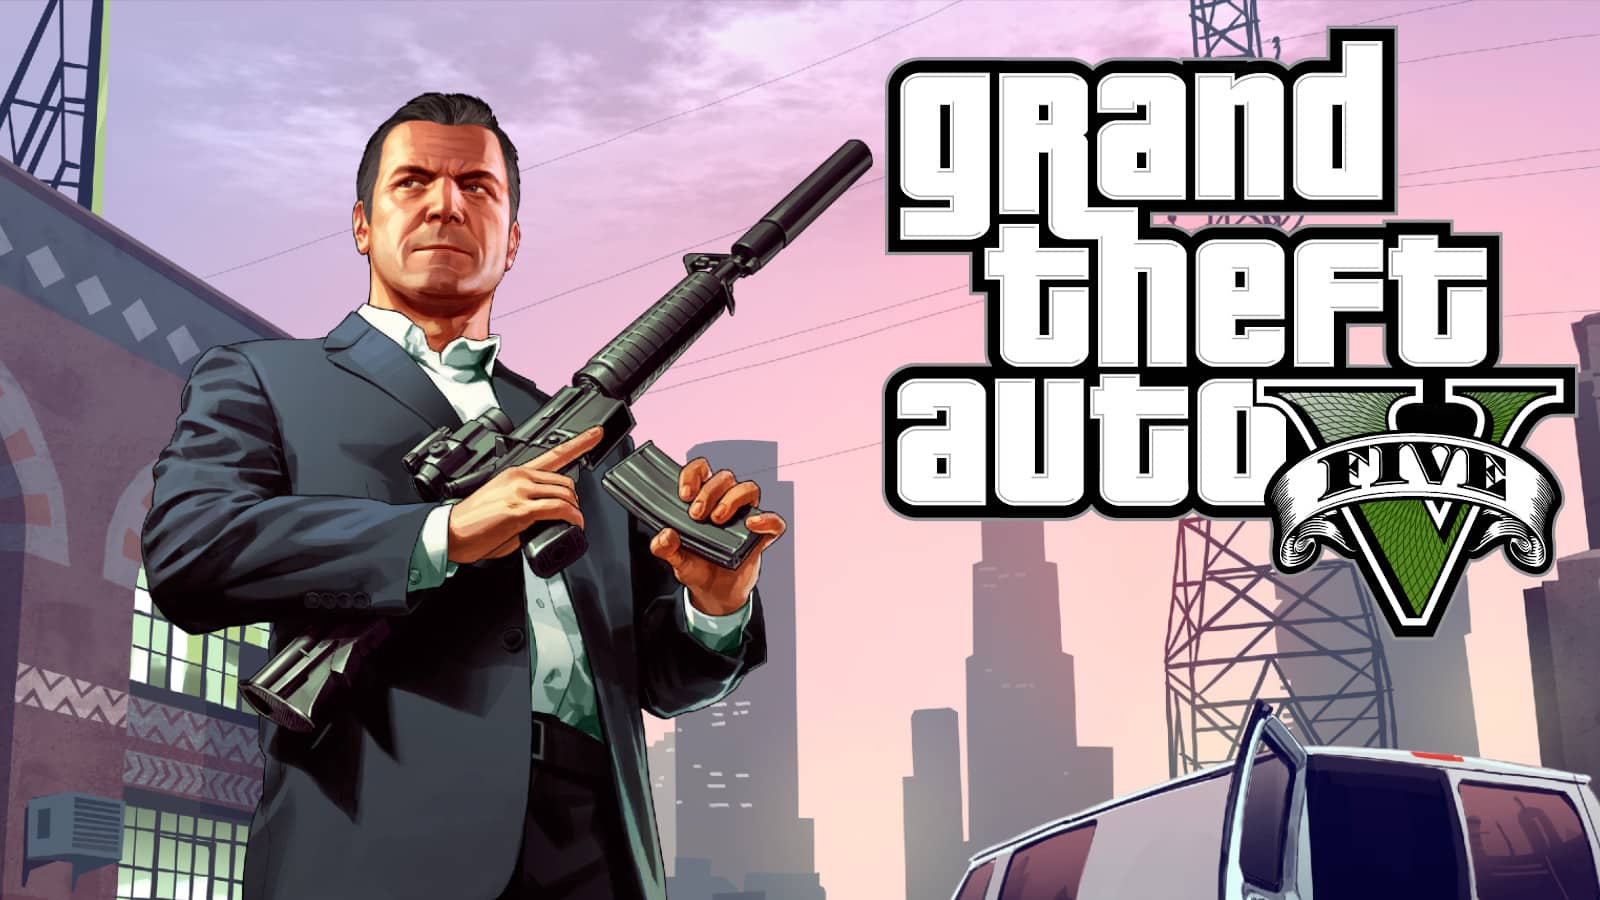 Leaked PC Edition of GTA 5 is Actually Malware - The Escapist